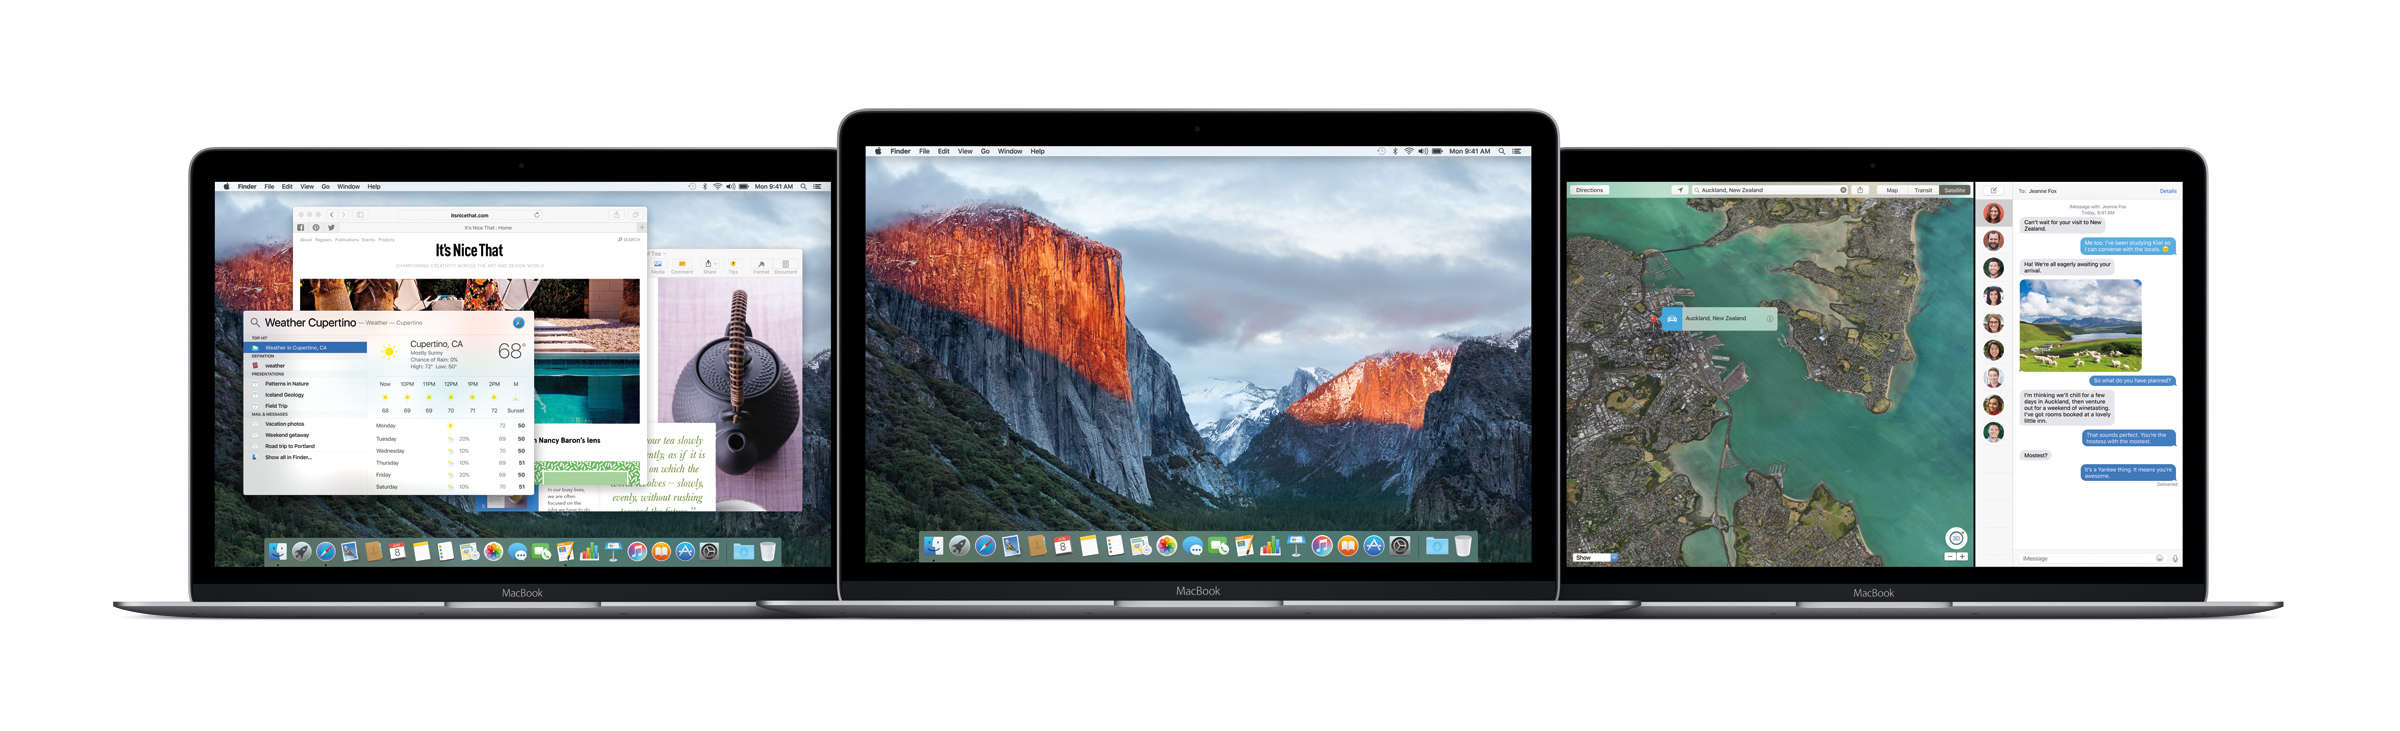 mac os x el capitan supported devices